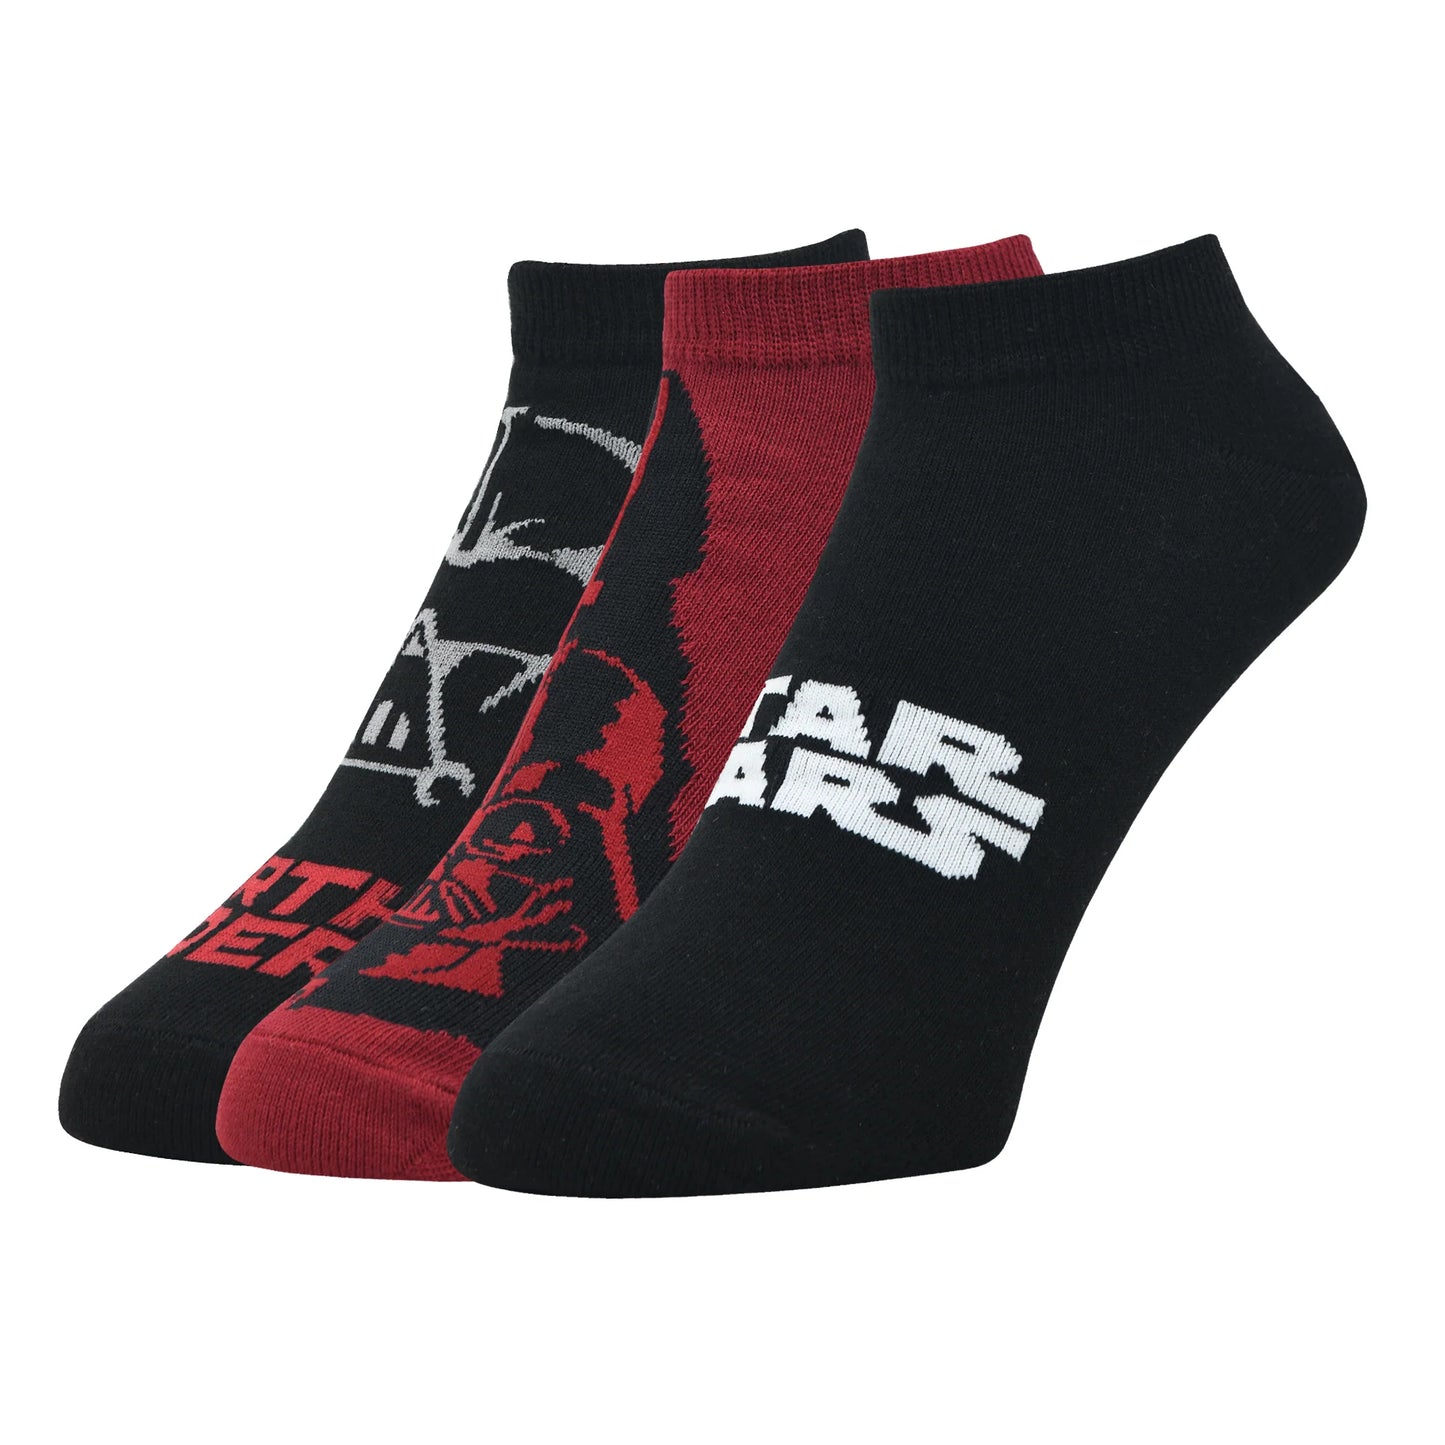 BALENZIA STAR WARS GIFT PACK FOR MEN- STAR WARS LOGO AND DARTH VADER-ANKLE LENGTH SOCKS (MULTICOLORED) (PACK OF 3 PAIRS/1U)